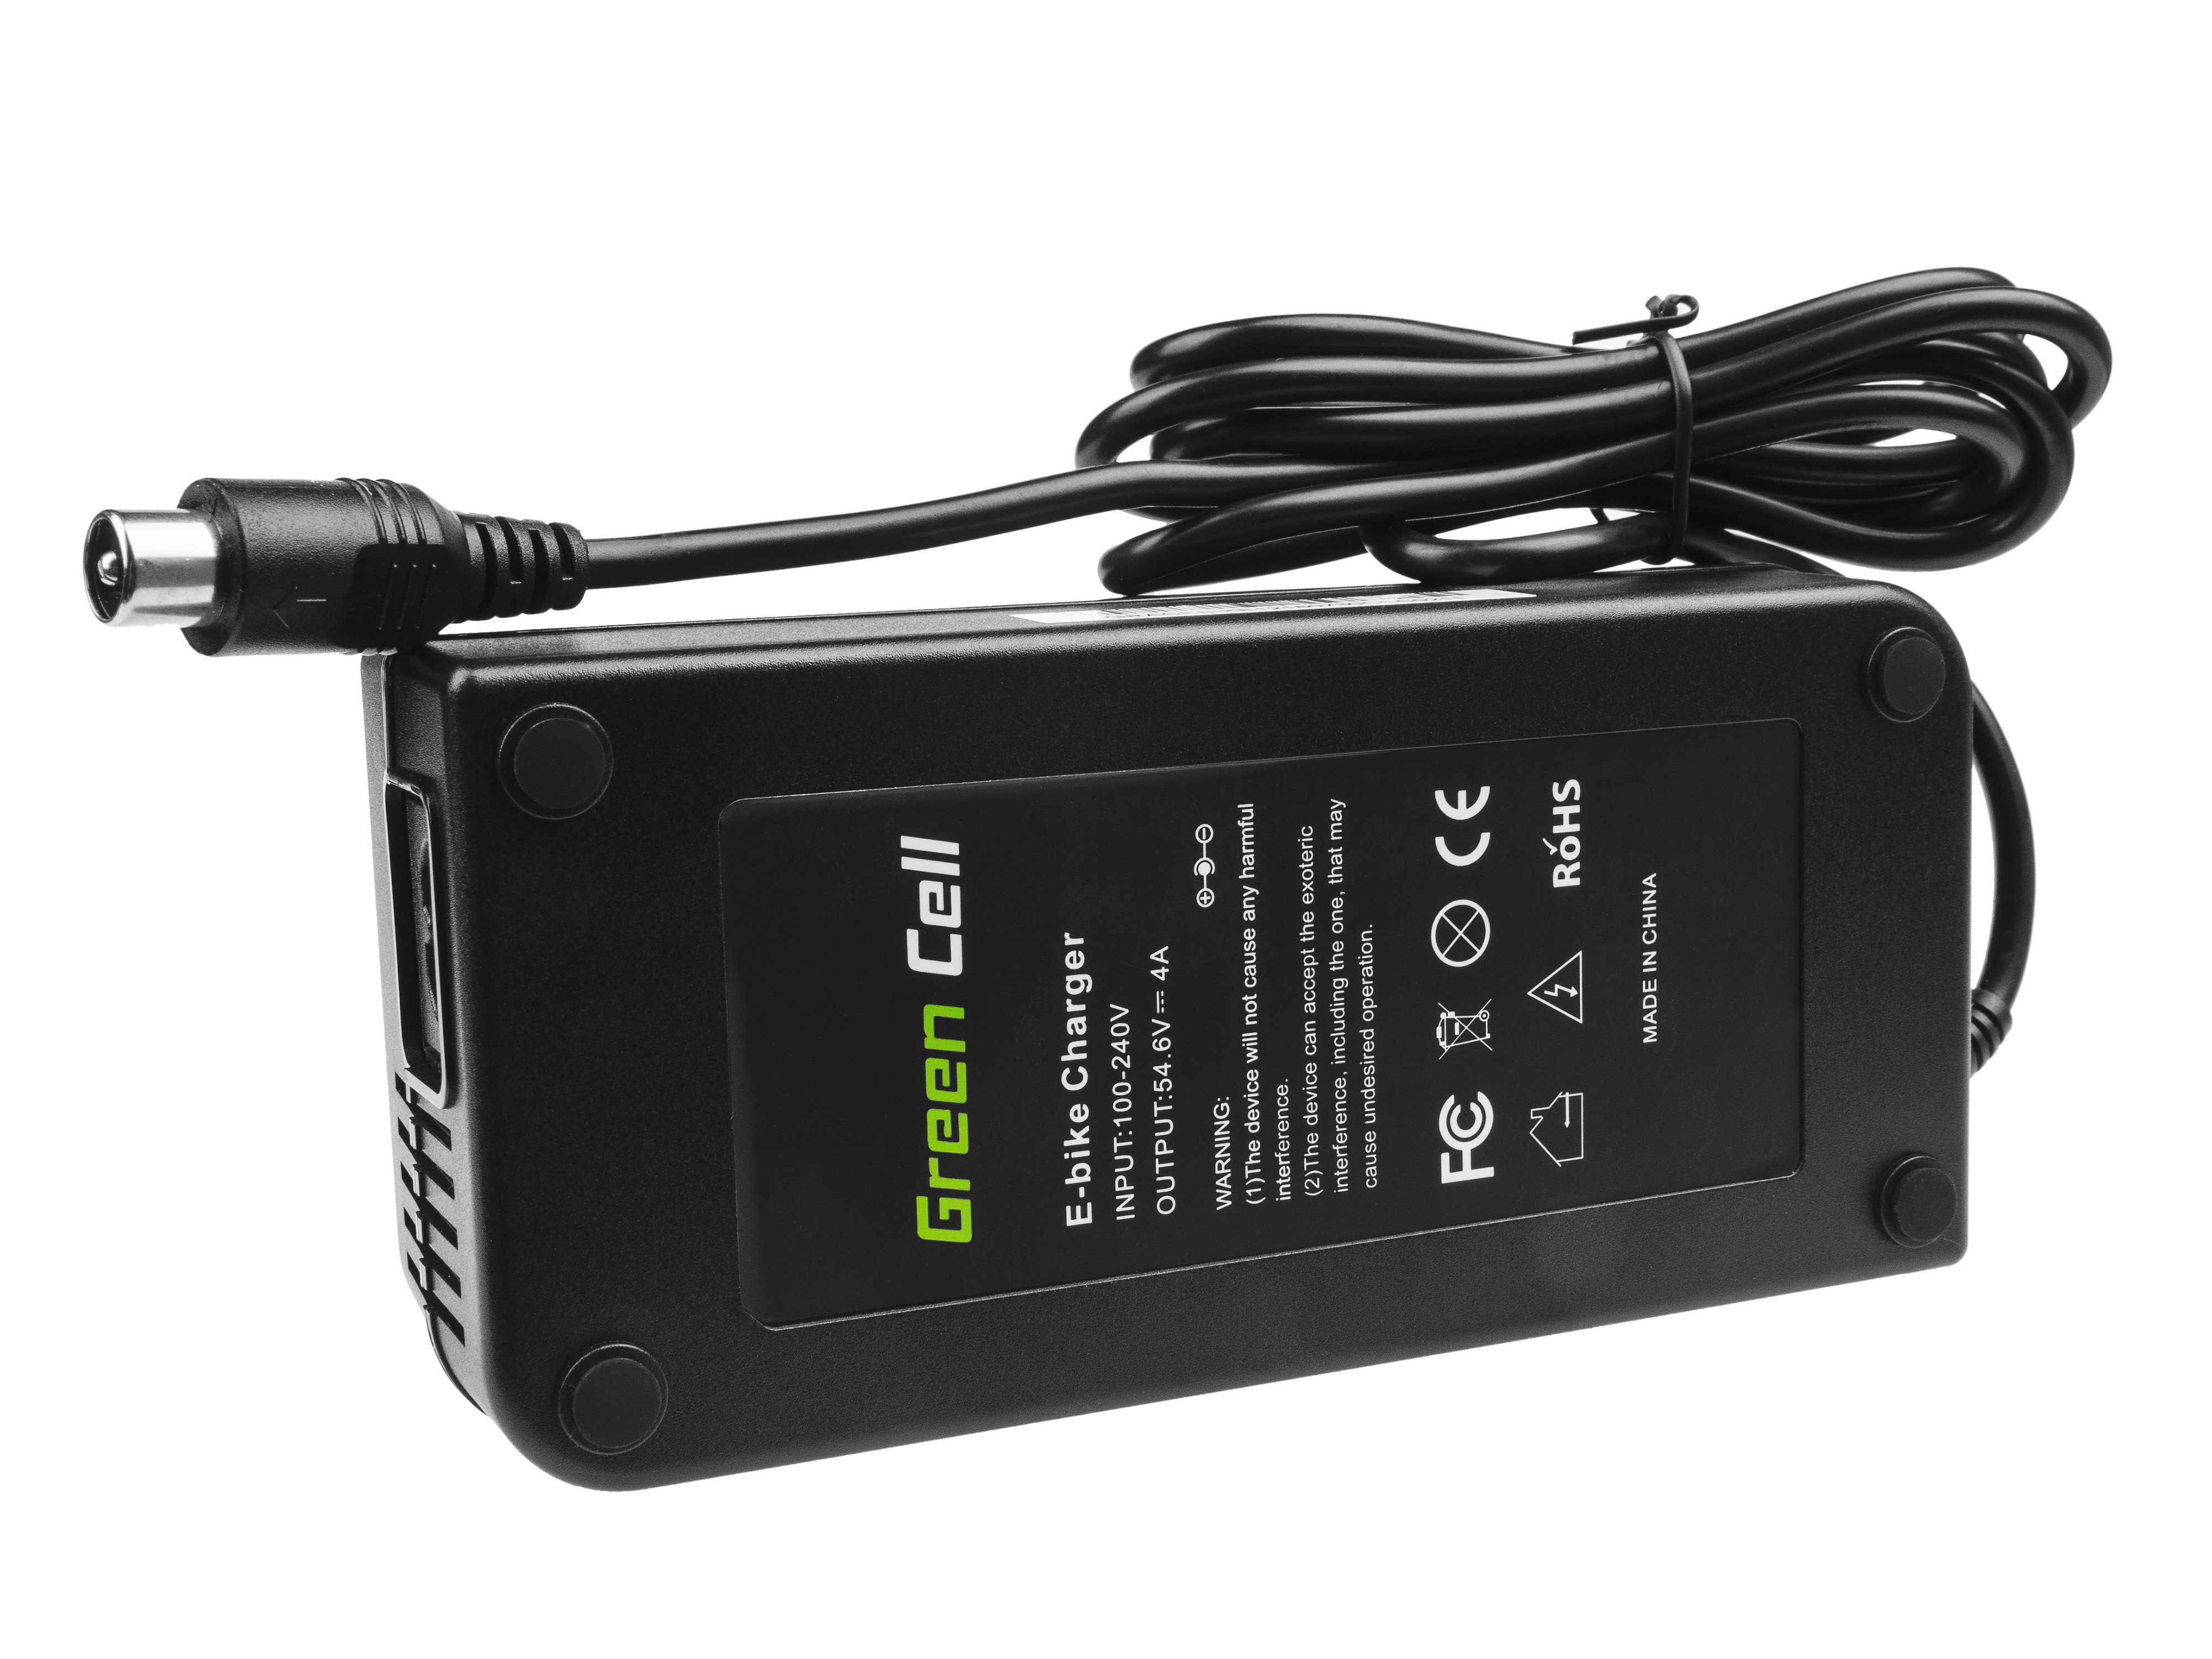 Green Cell Charger 54.6V 4A (RCA) for EBIKE batteries 48V